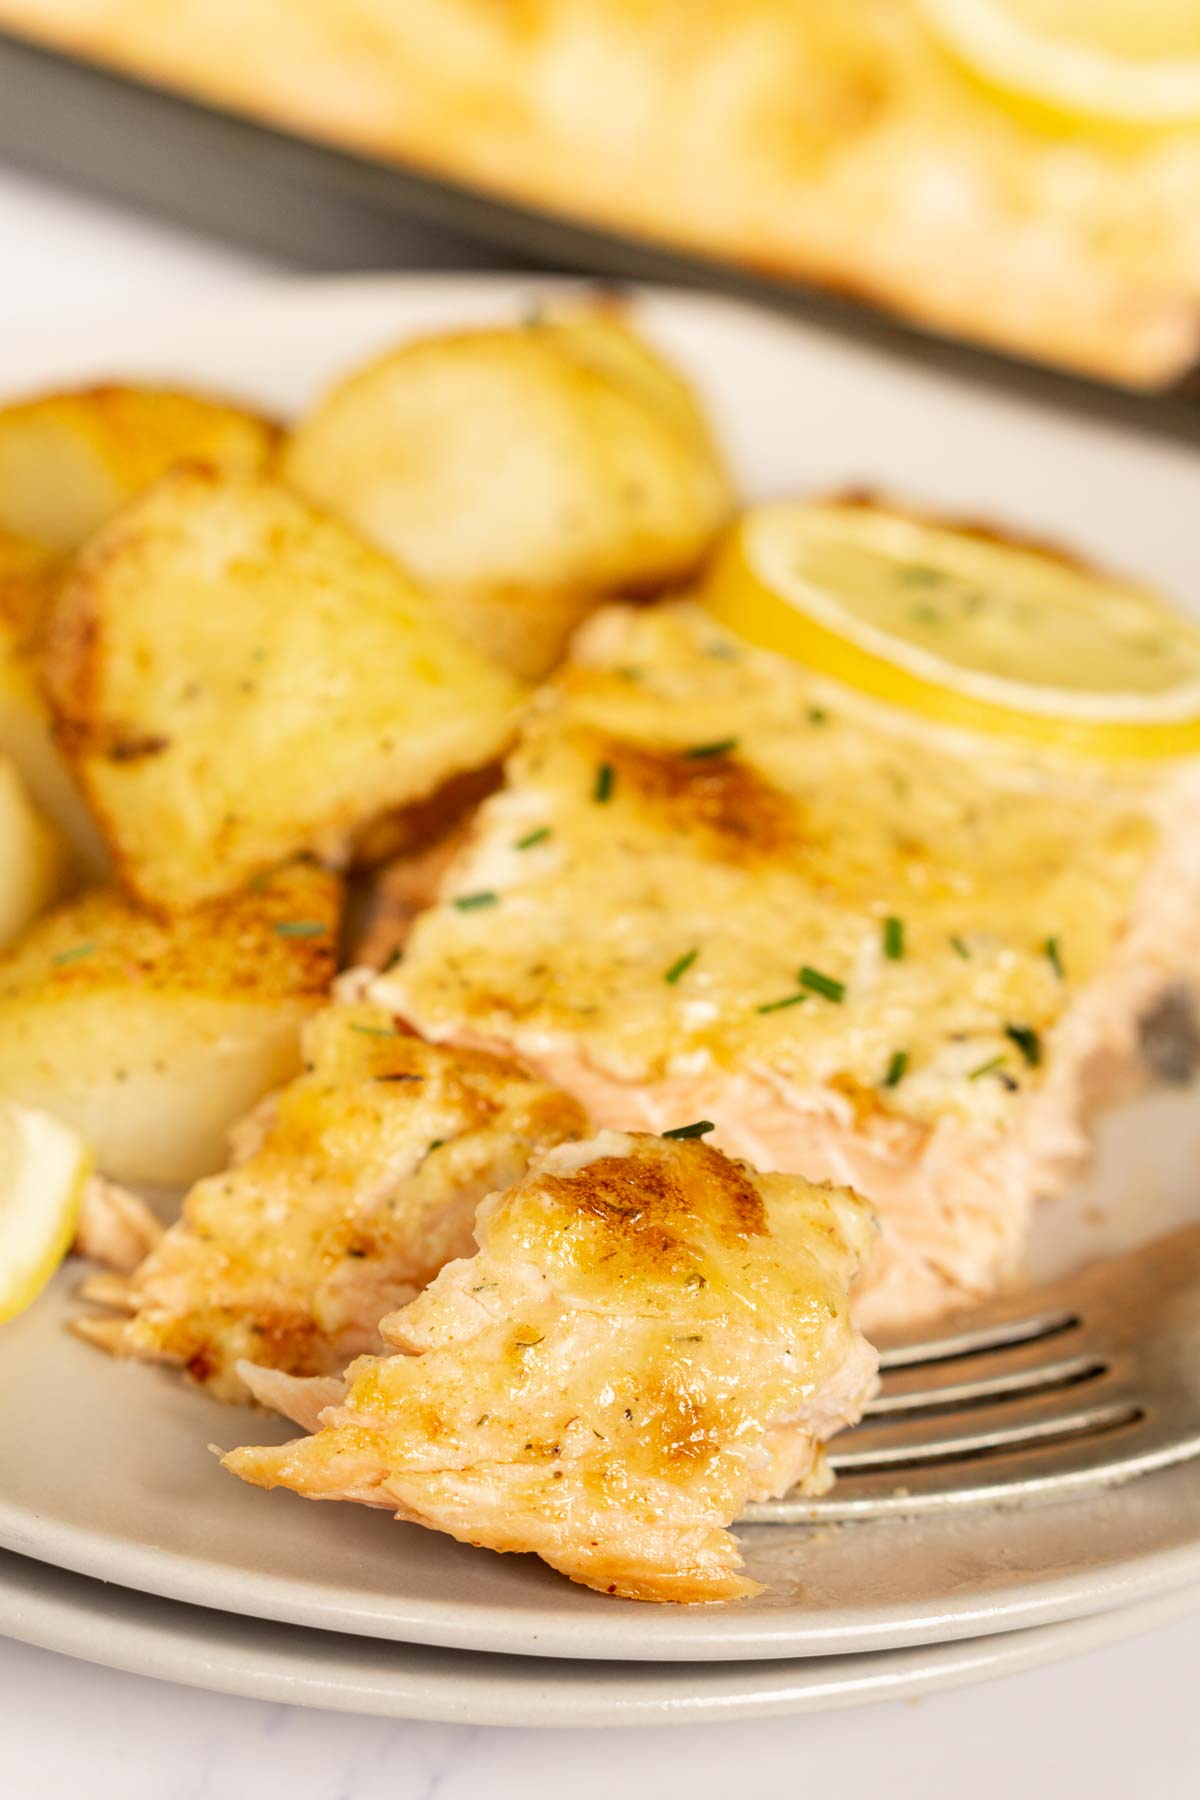 Mayo baked salmon on a plate with potatoes